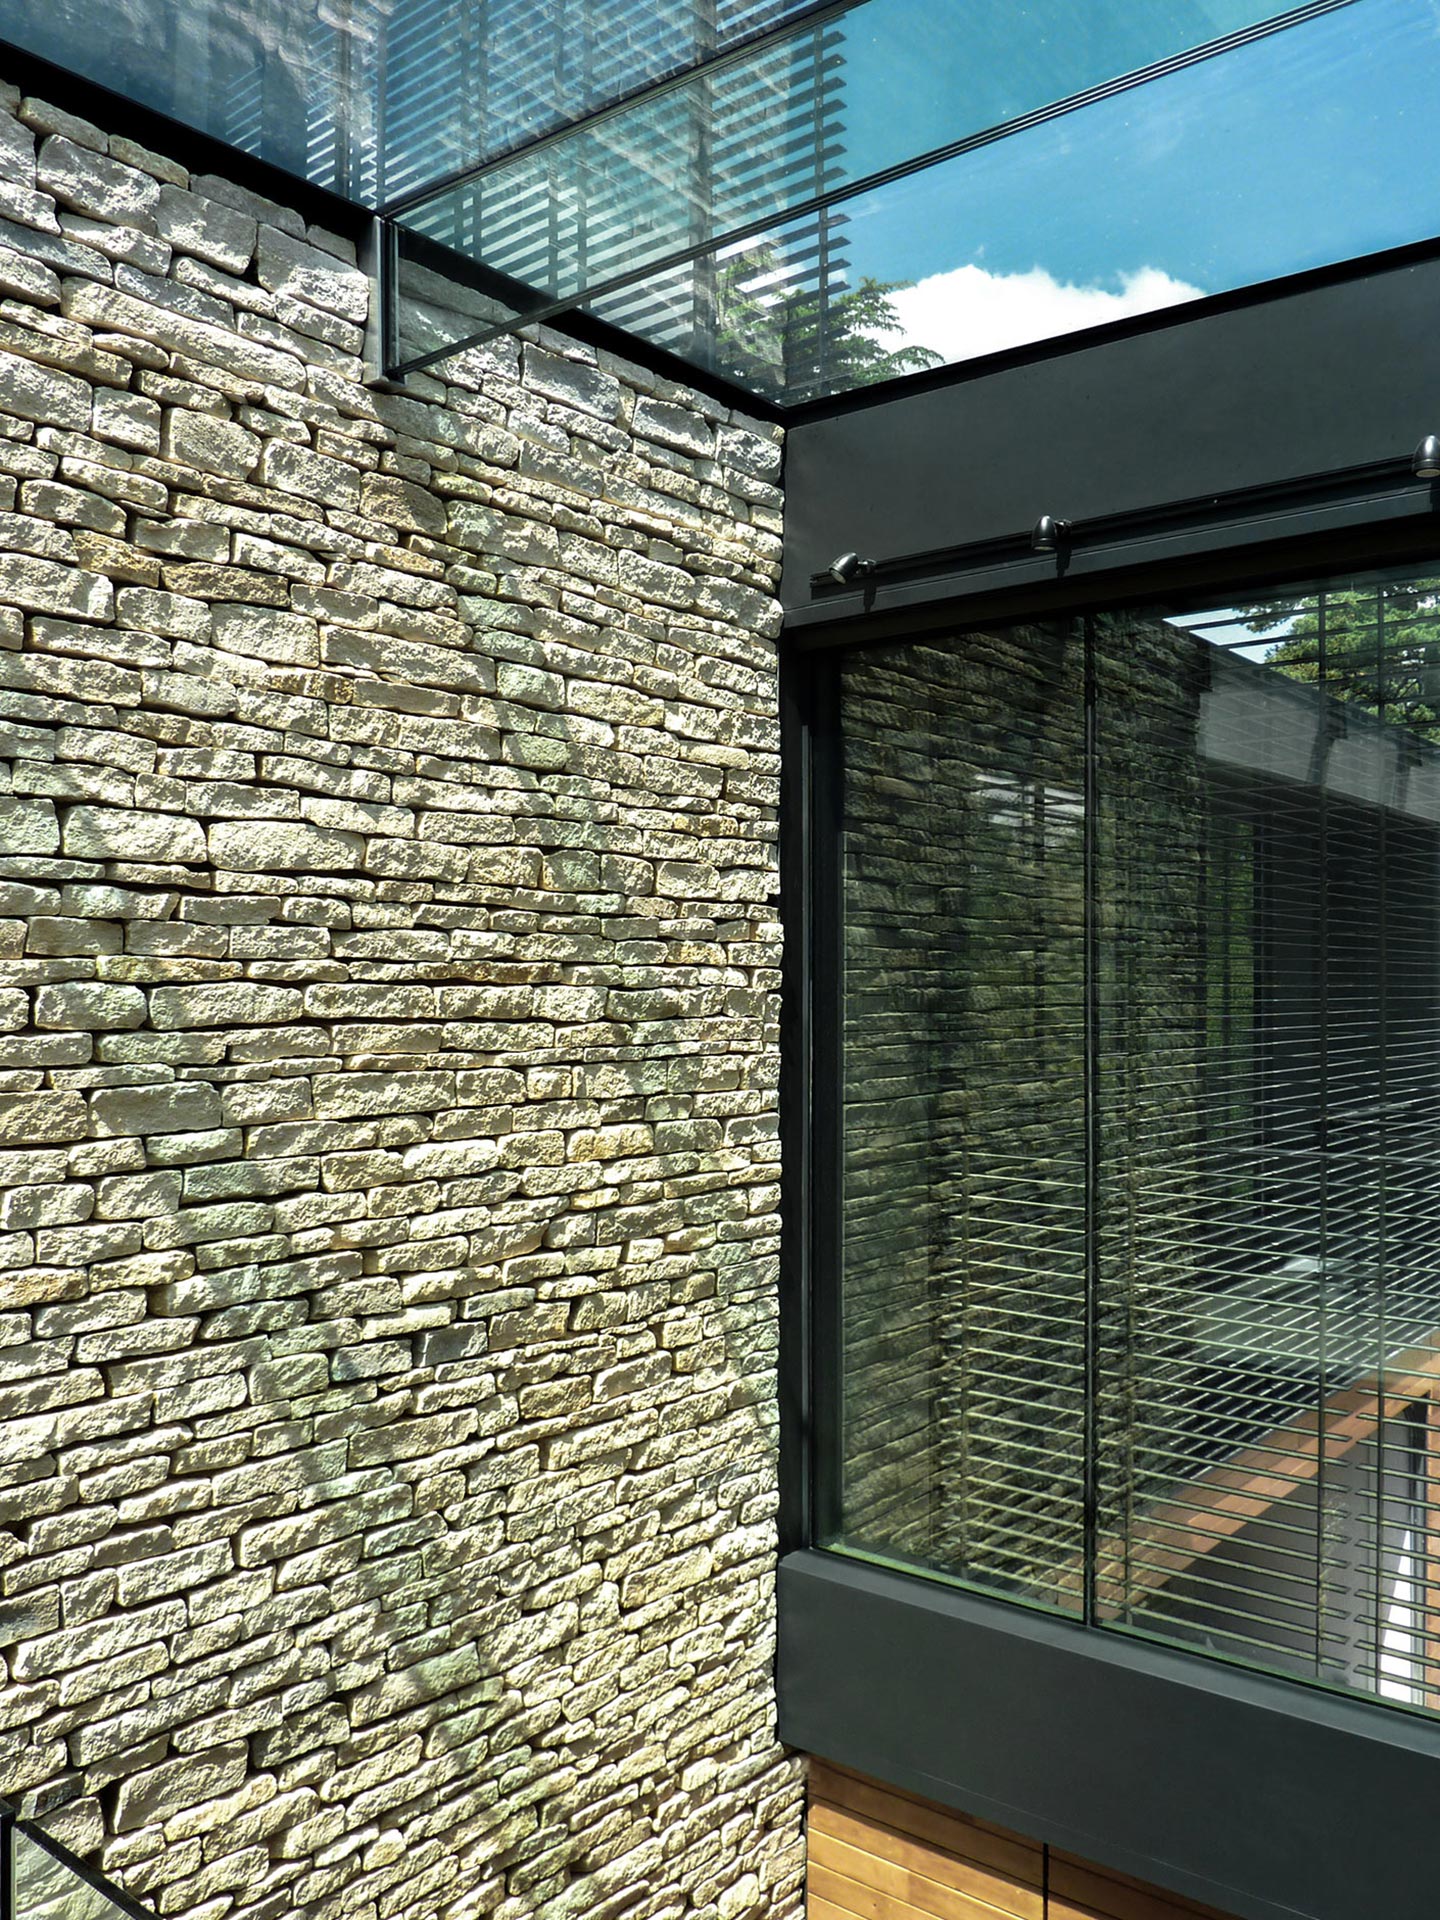 internal stone wall with grass roof